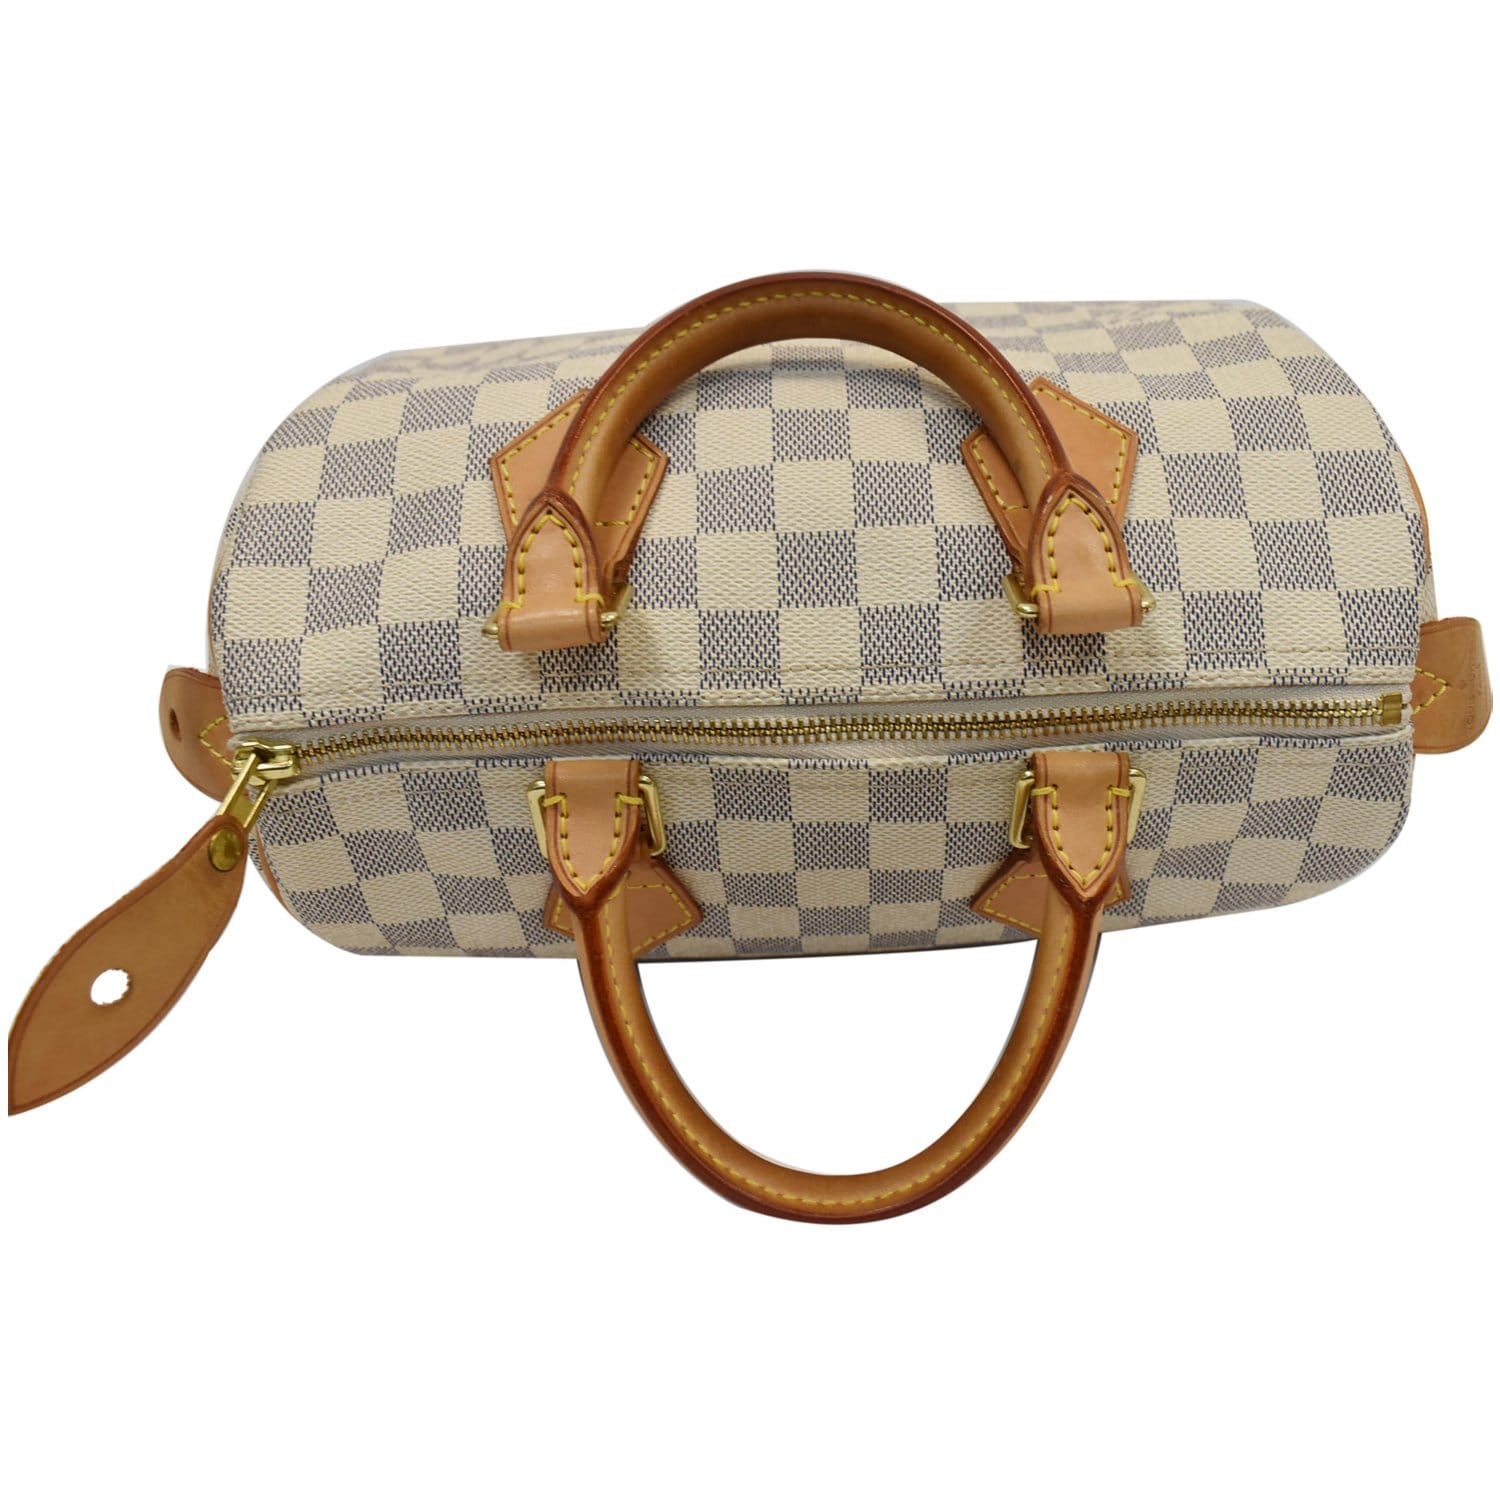 Louis Vuitton By the Pool Speedy 25, New in Dustbag MA001 - Julia